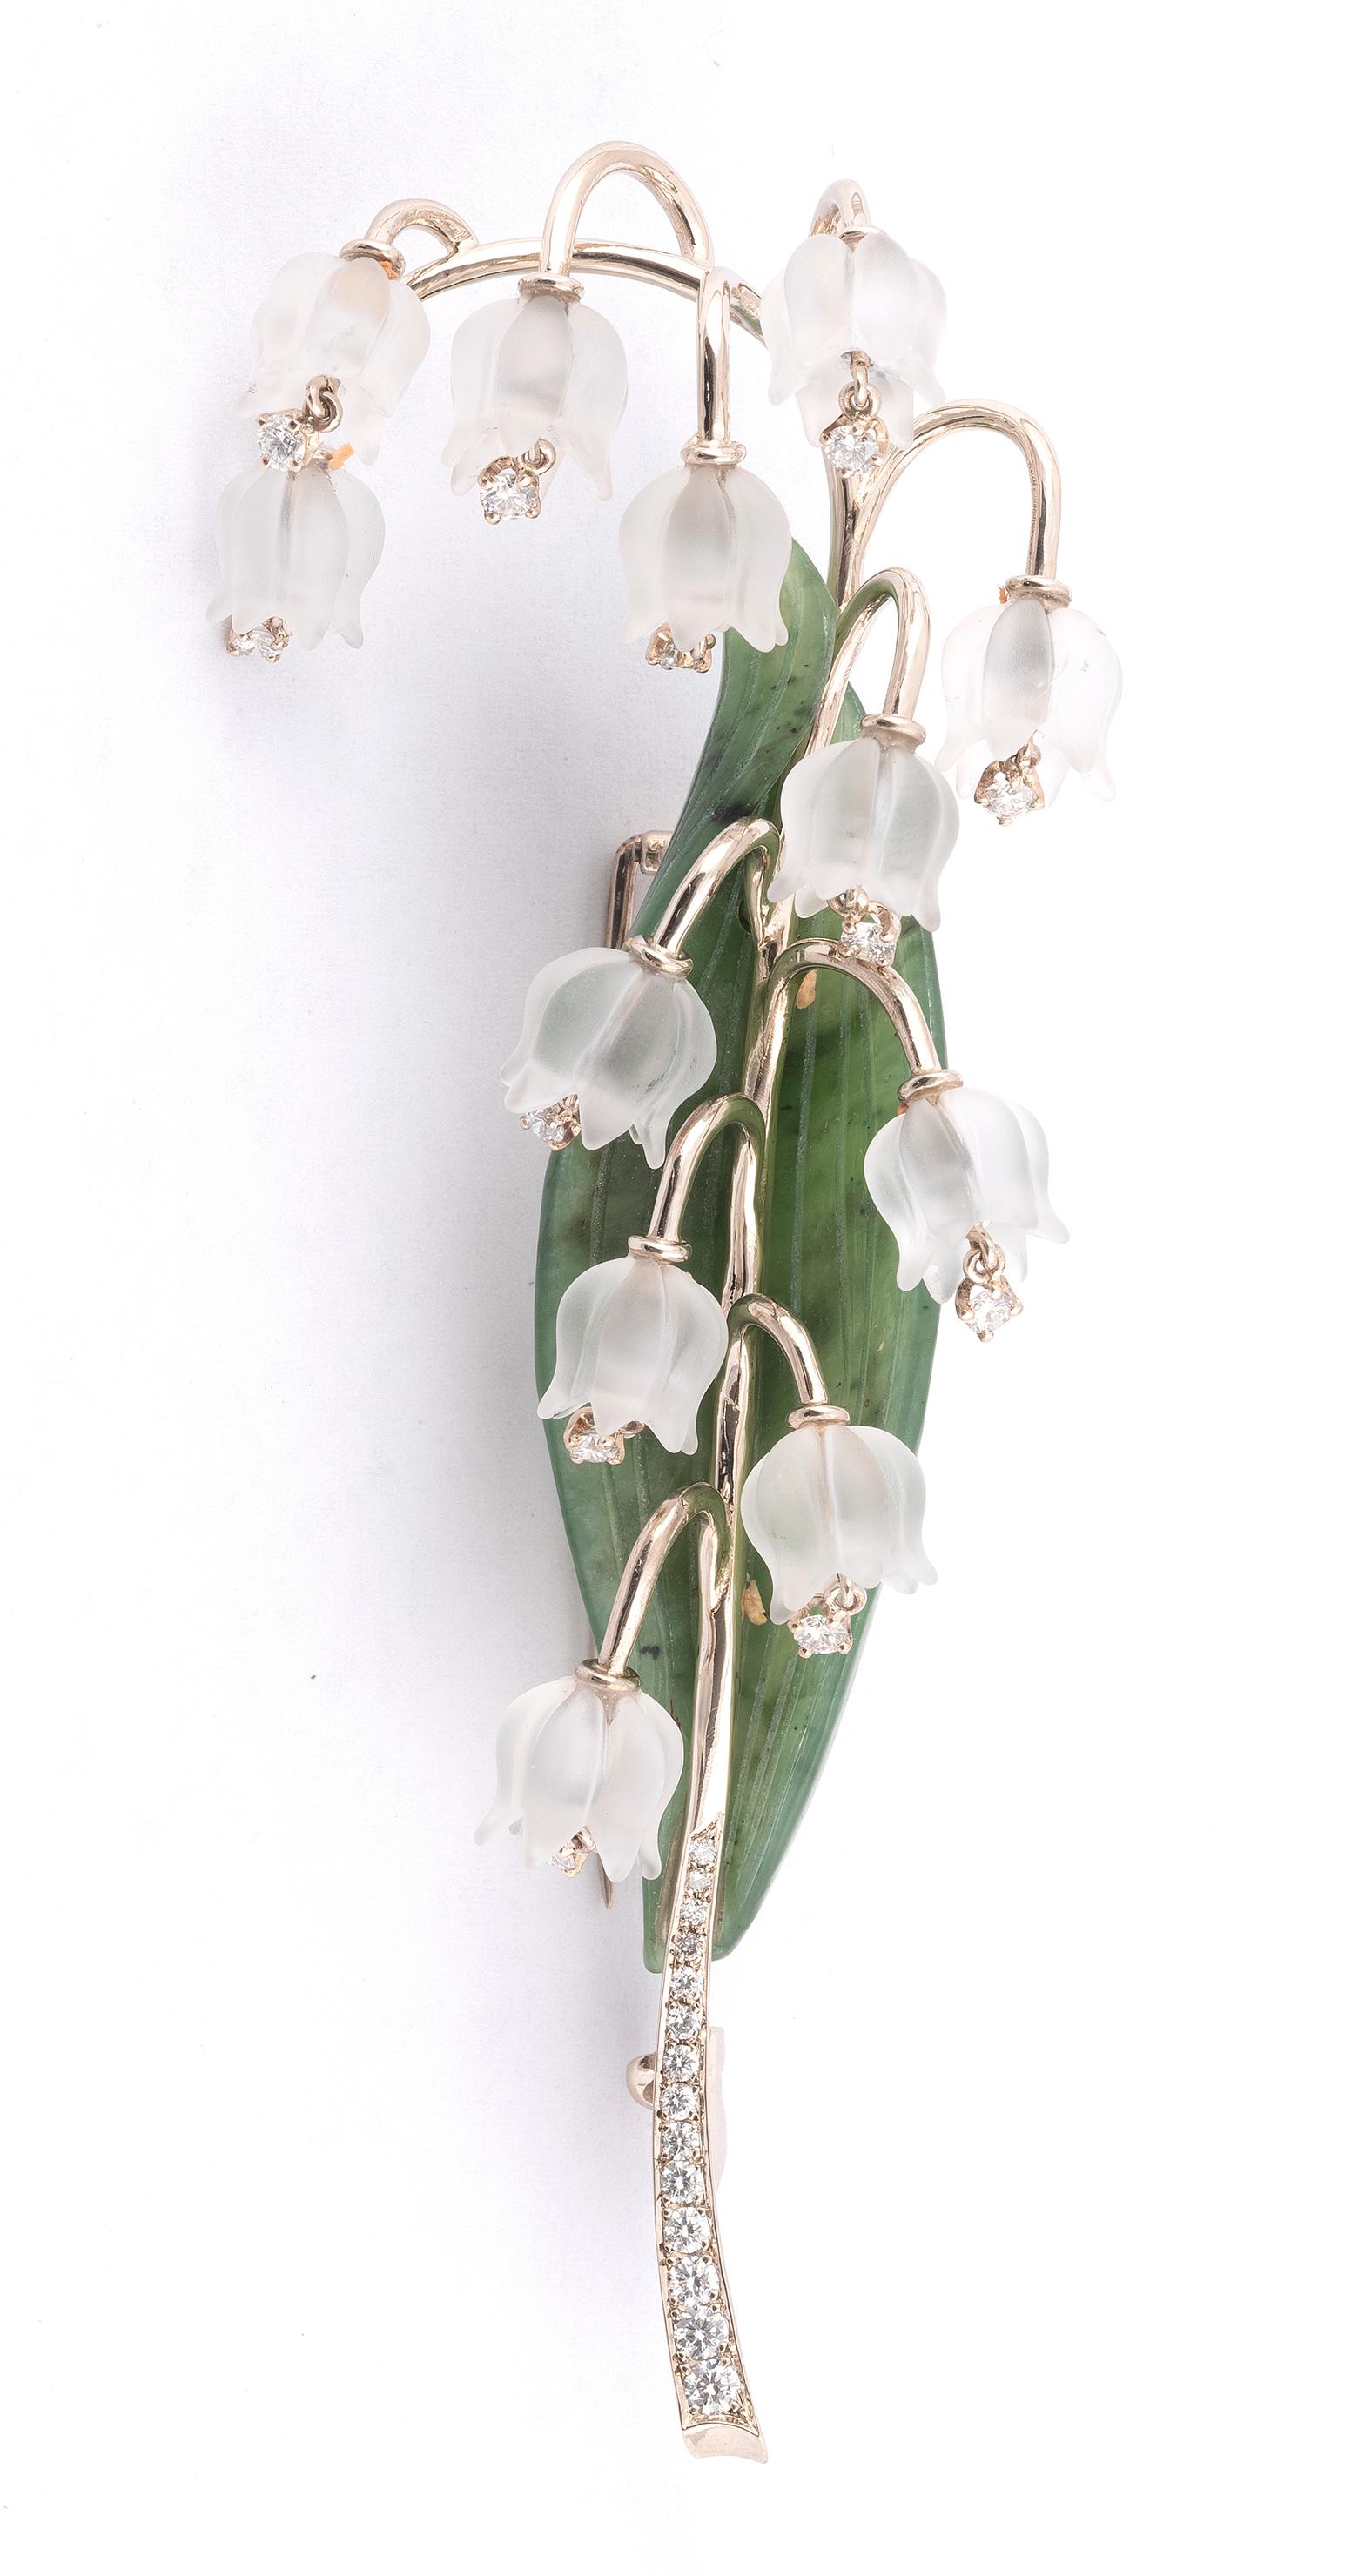 The brooch realistically modelled as a stalk of lily of the valley, set with carved quartz flowers each suspending a single-cut diamond, to a carved serpentine leaf.
Lenght:9cm
Weight:24,50gr.